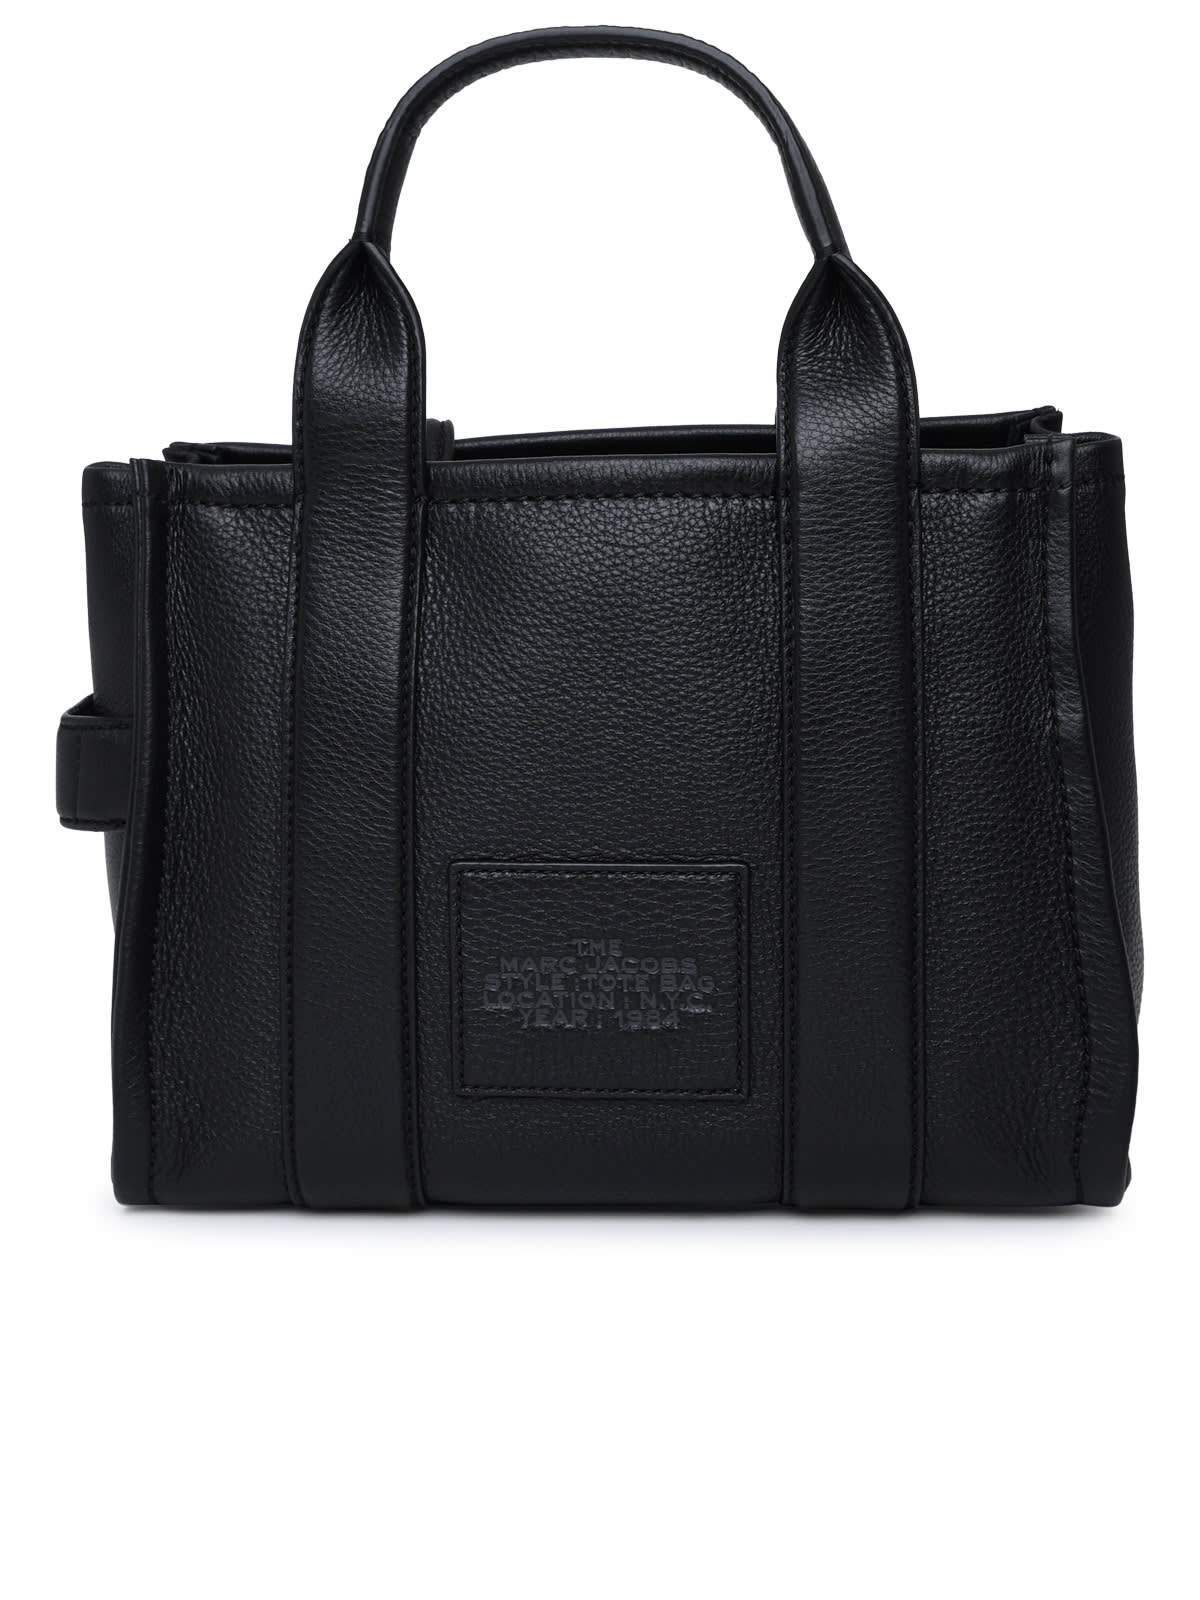 Shop Marc Jacobs The Tote Black Leather Bag